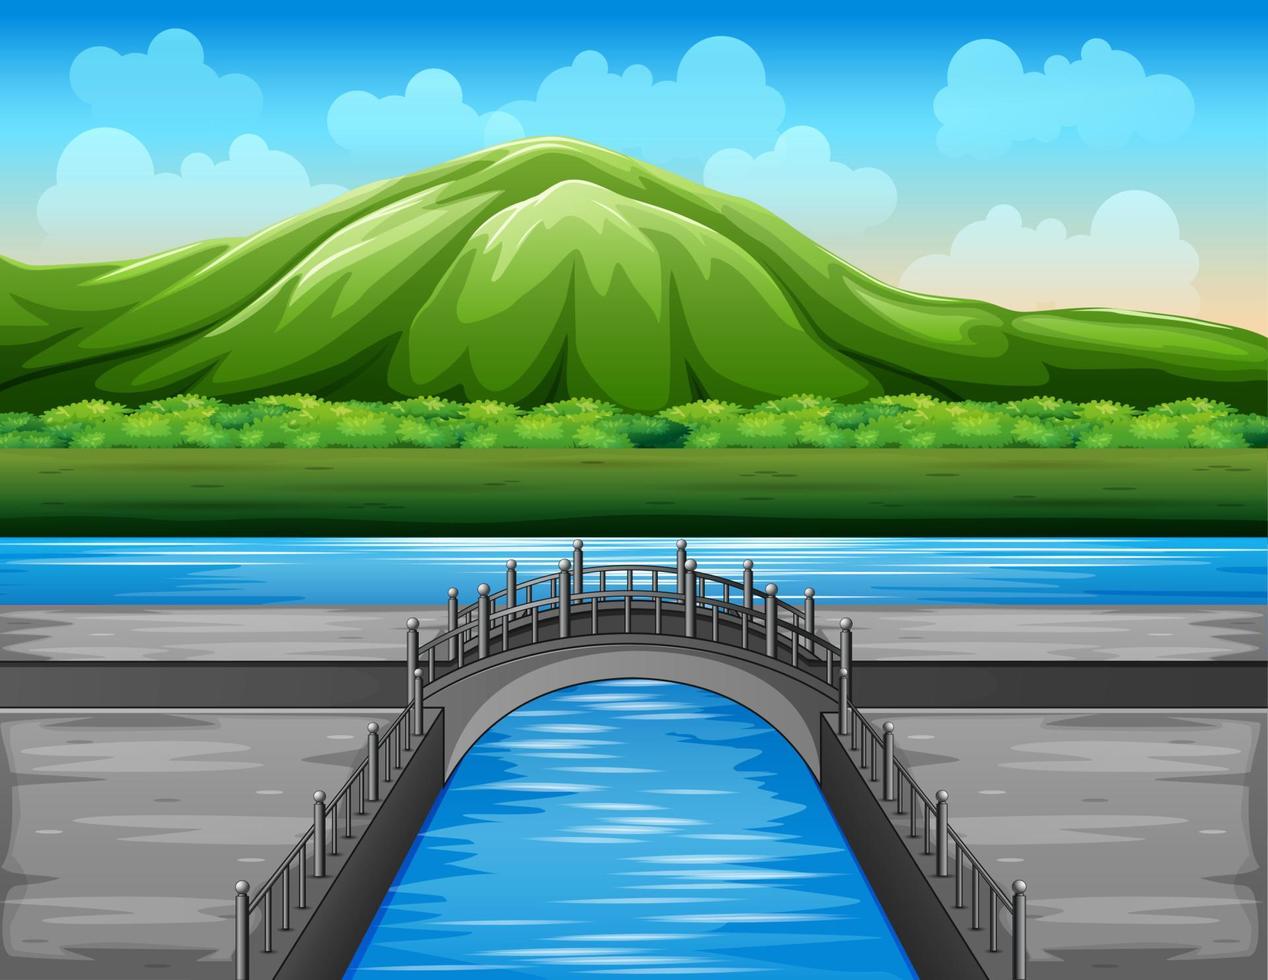 The arch bridge with green mountain background vector